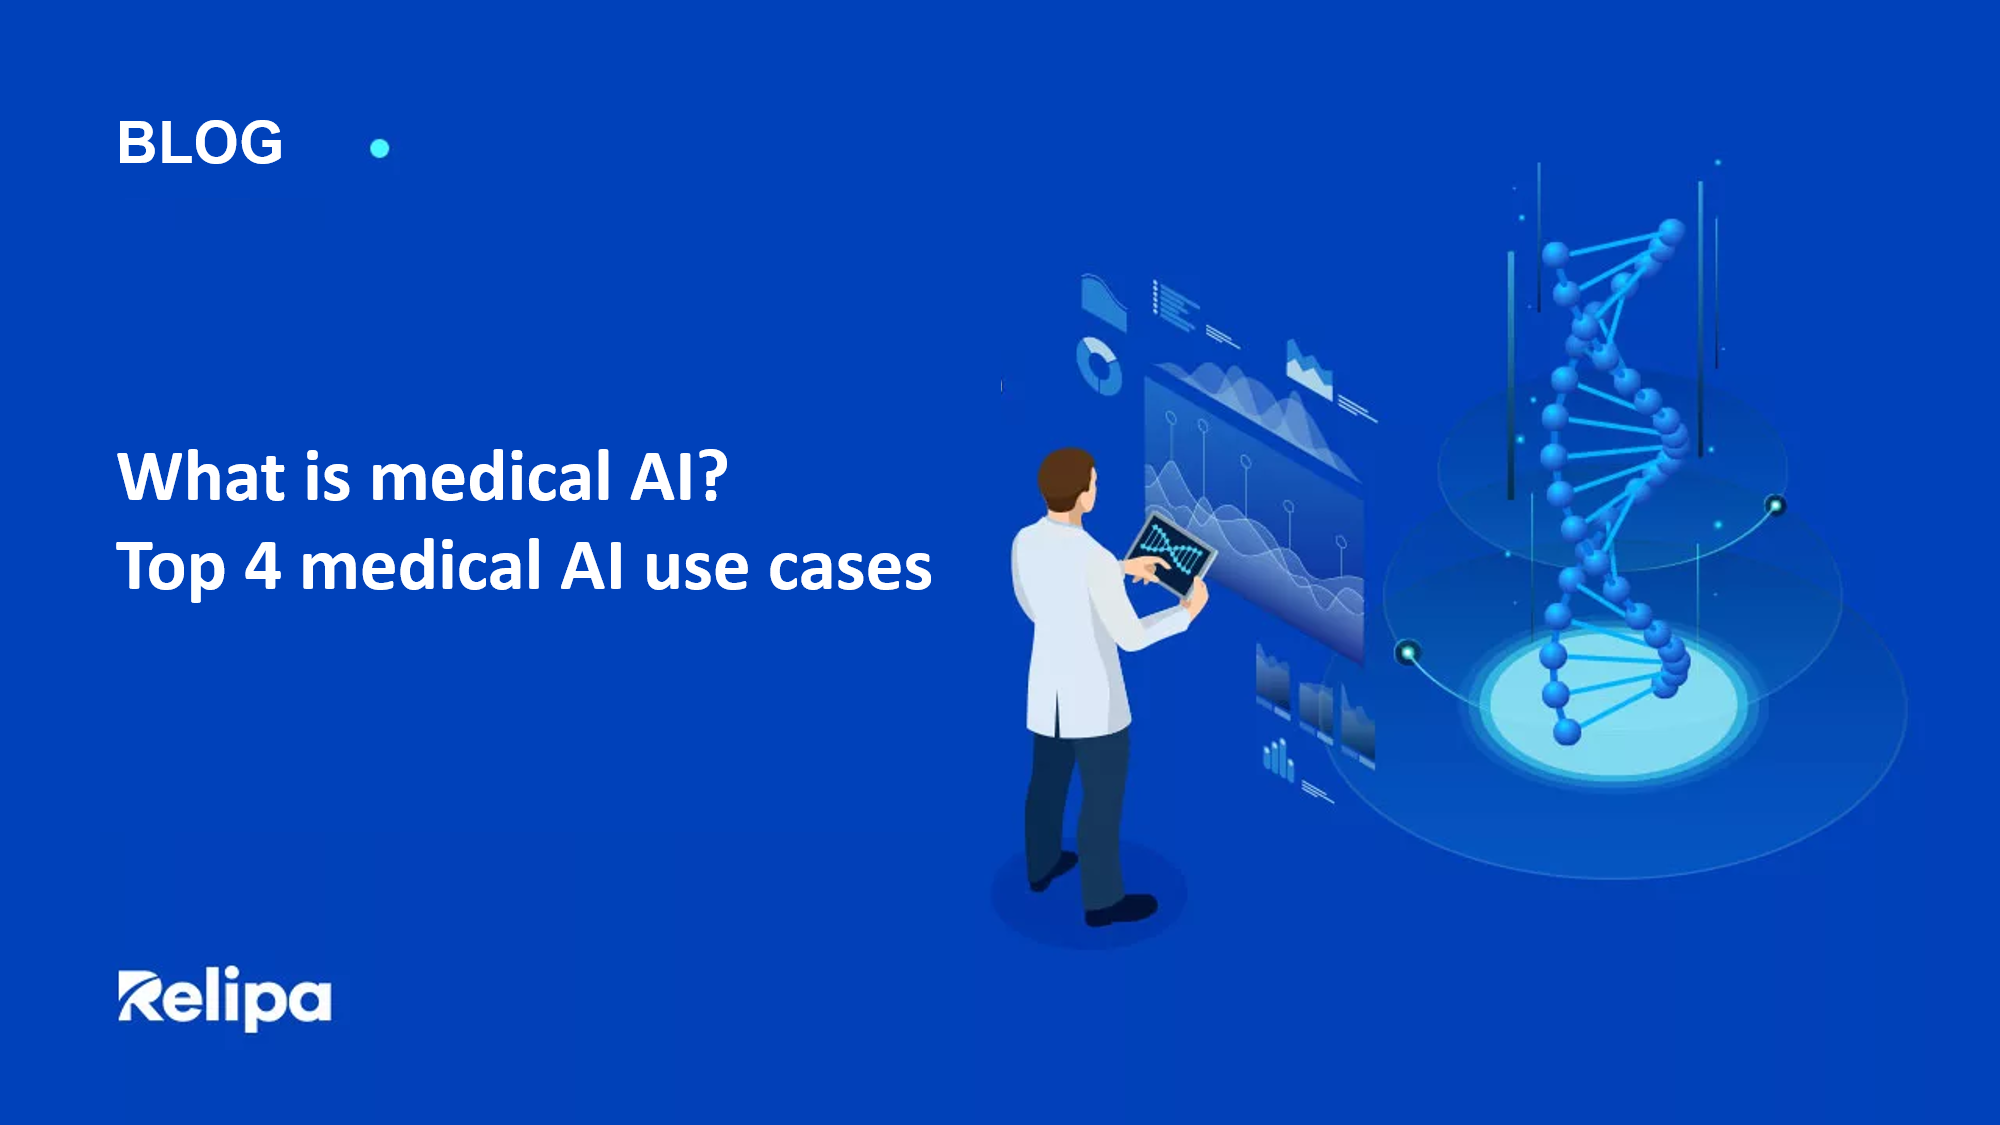 What is medical AI? Top 4 medical AI use cases